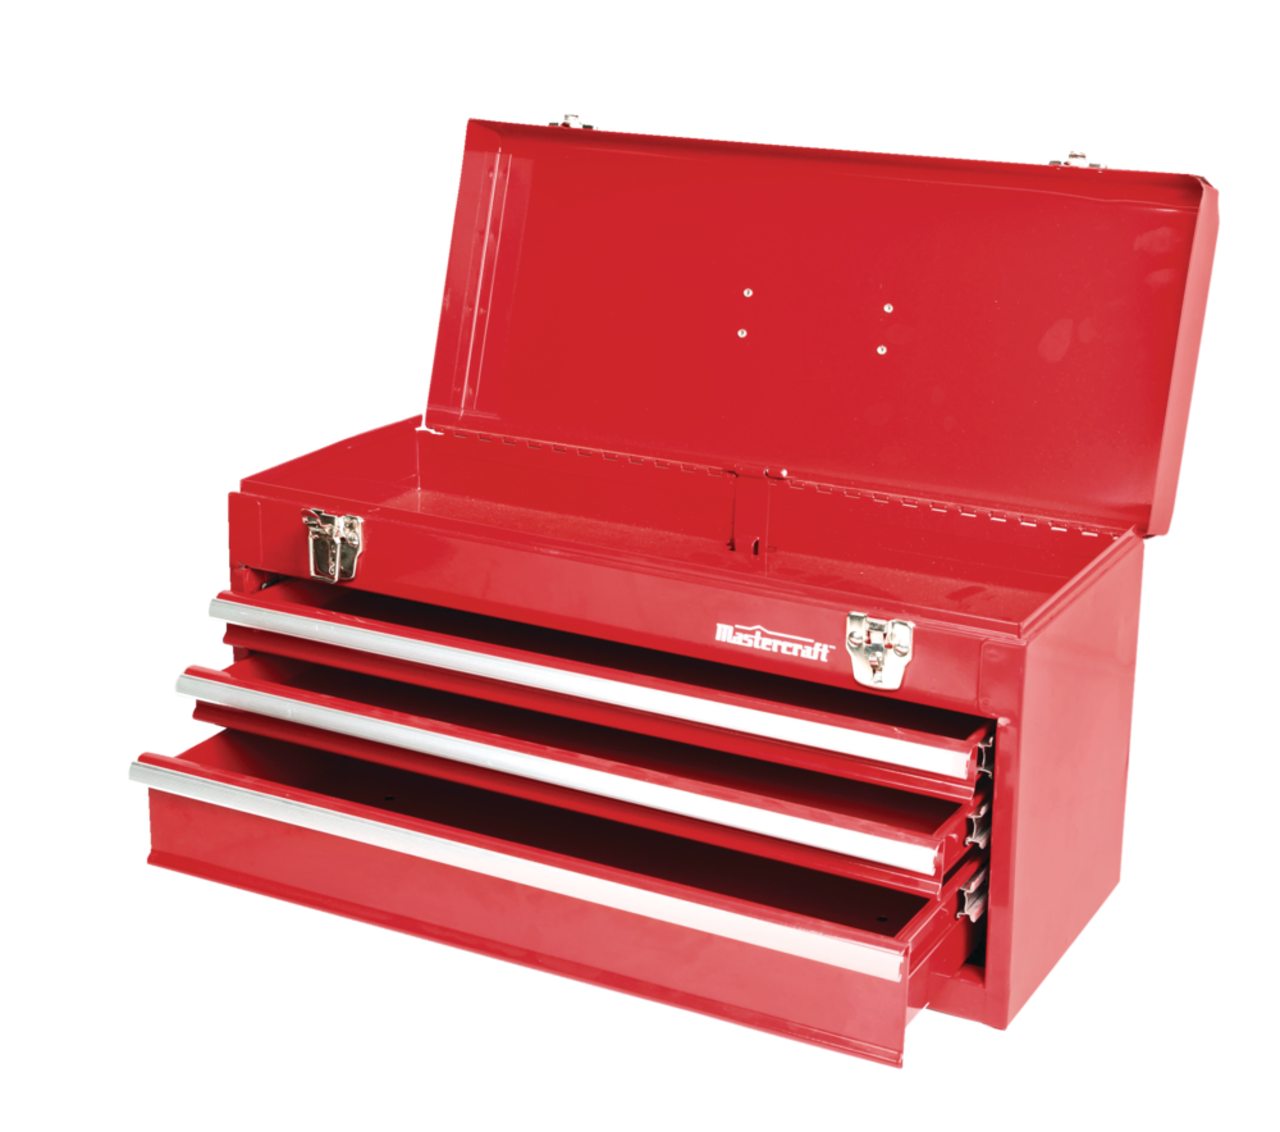 Mastercraft Portable Metal Tool Box w/ 3-Drawer Chest, Red, 21-in